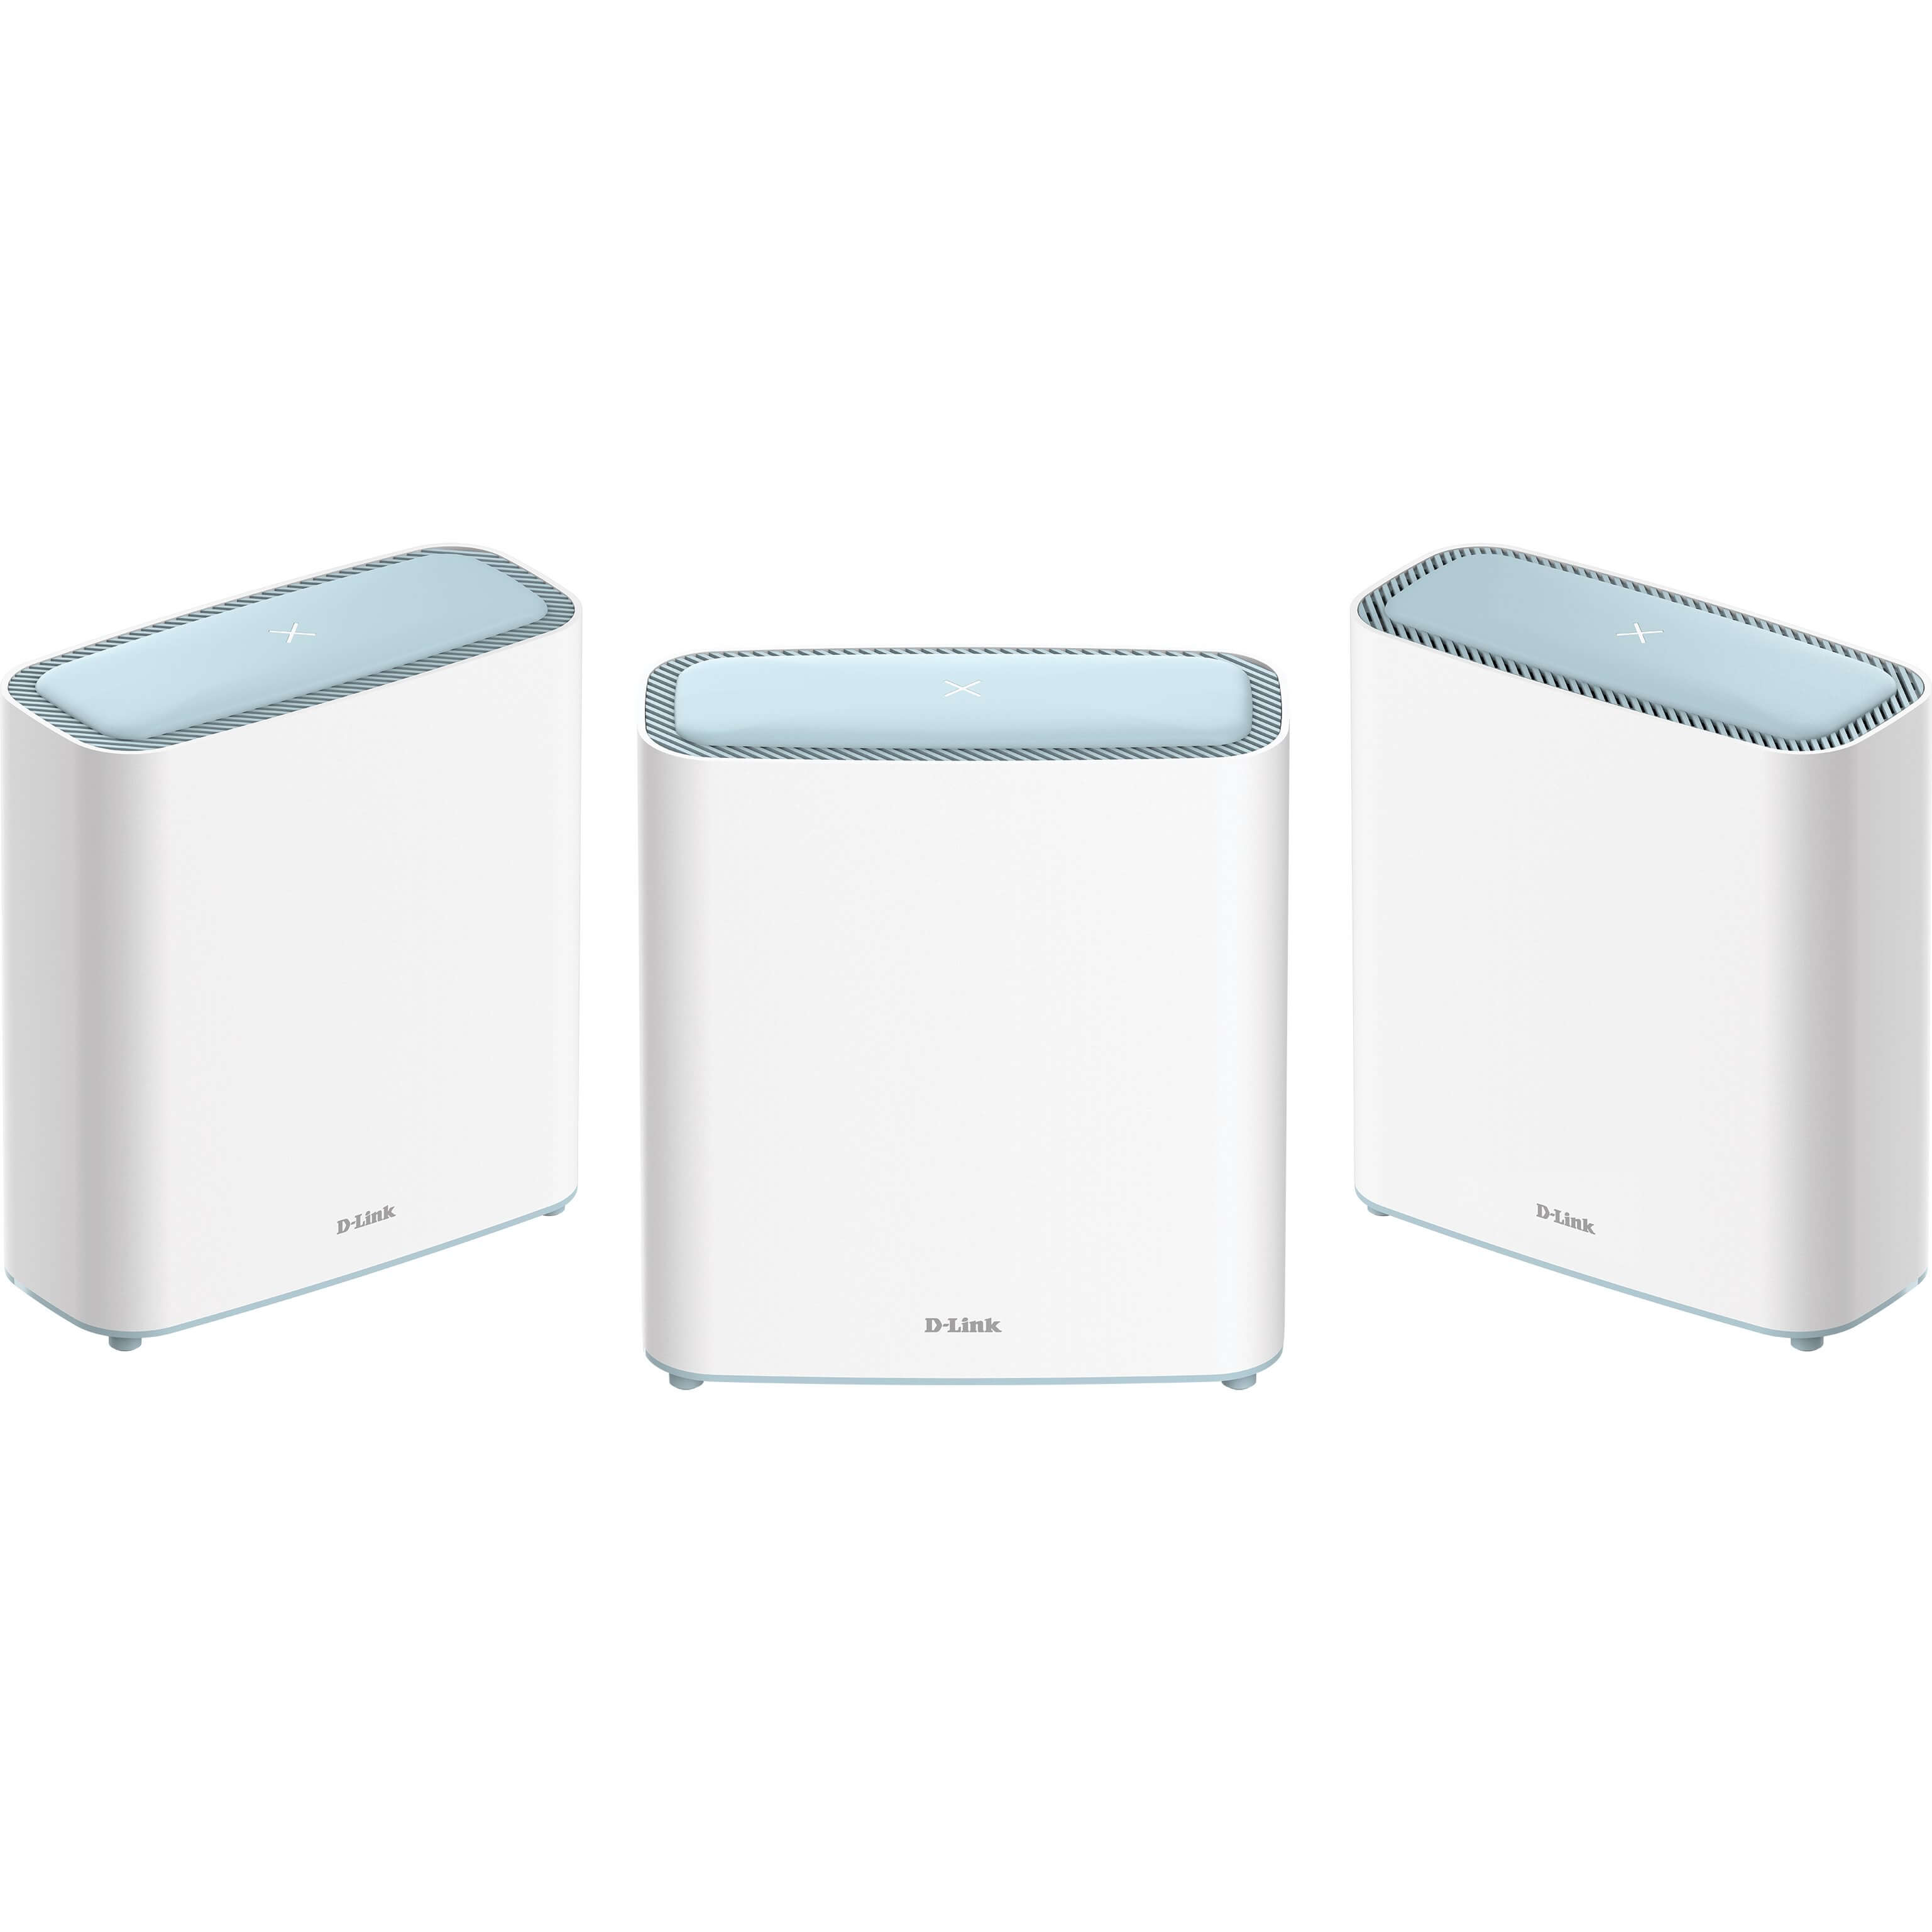   Systme WiFi Mesh   Solution MESH Wi-Fi 6 Eagle Pro AX3200 (Pack de 3) M32-3